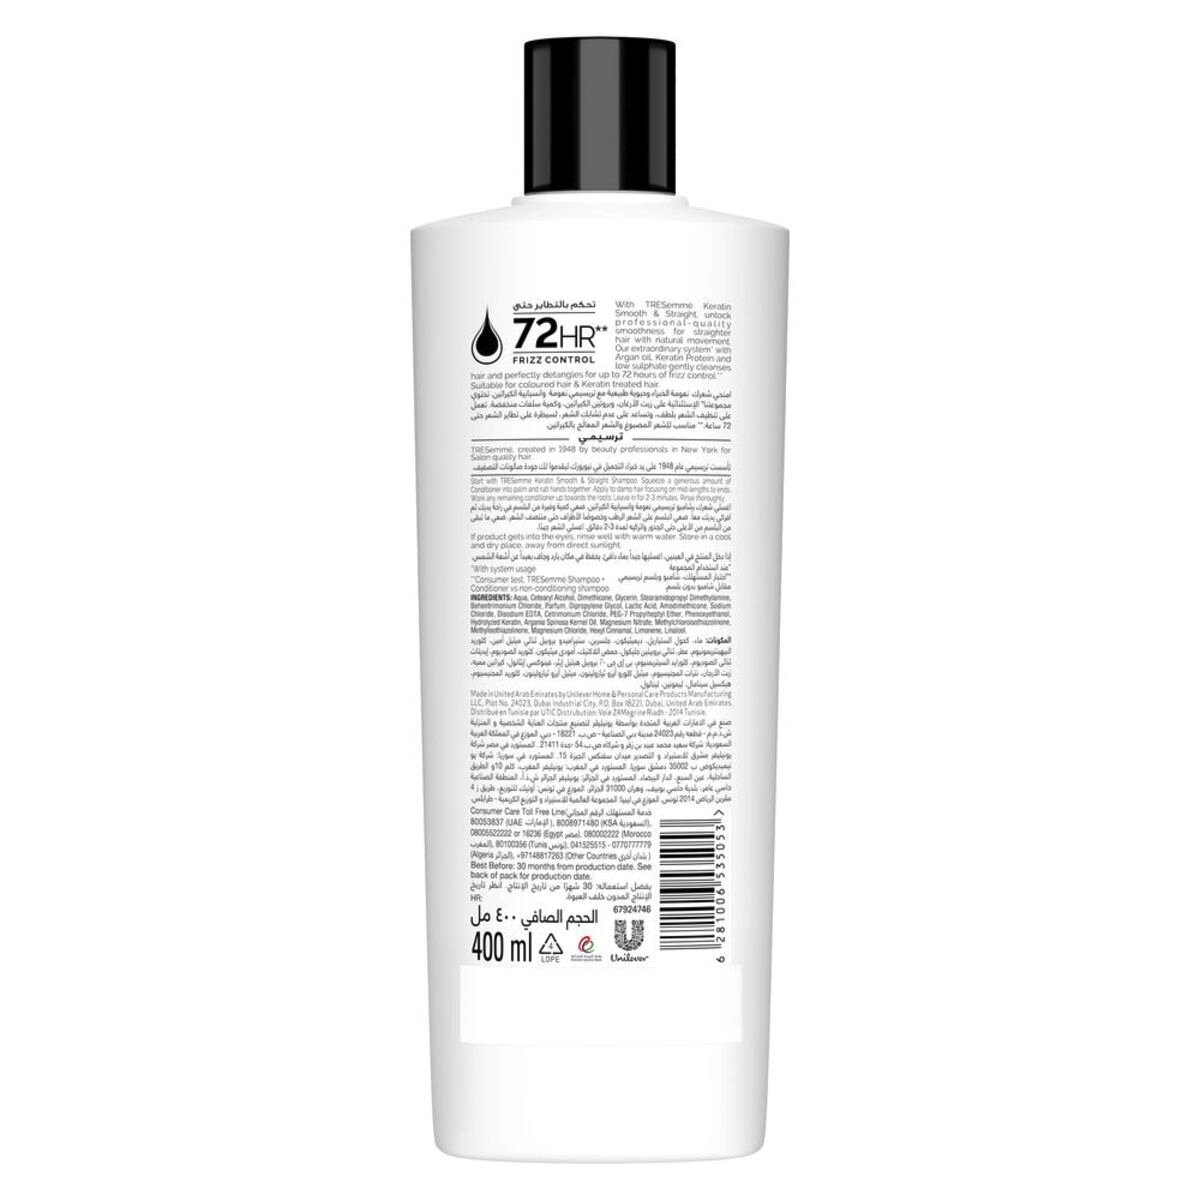 TRESemme Keratin Smooth Conditioner with Argan Oil for Dry & Frizzy Hair 400 ml